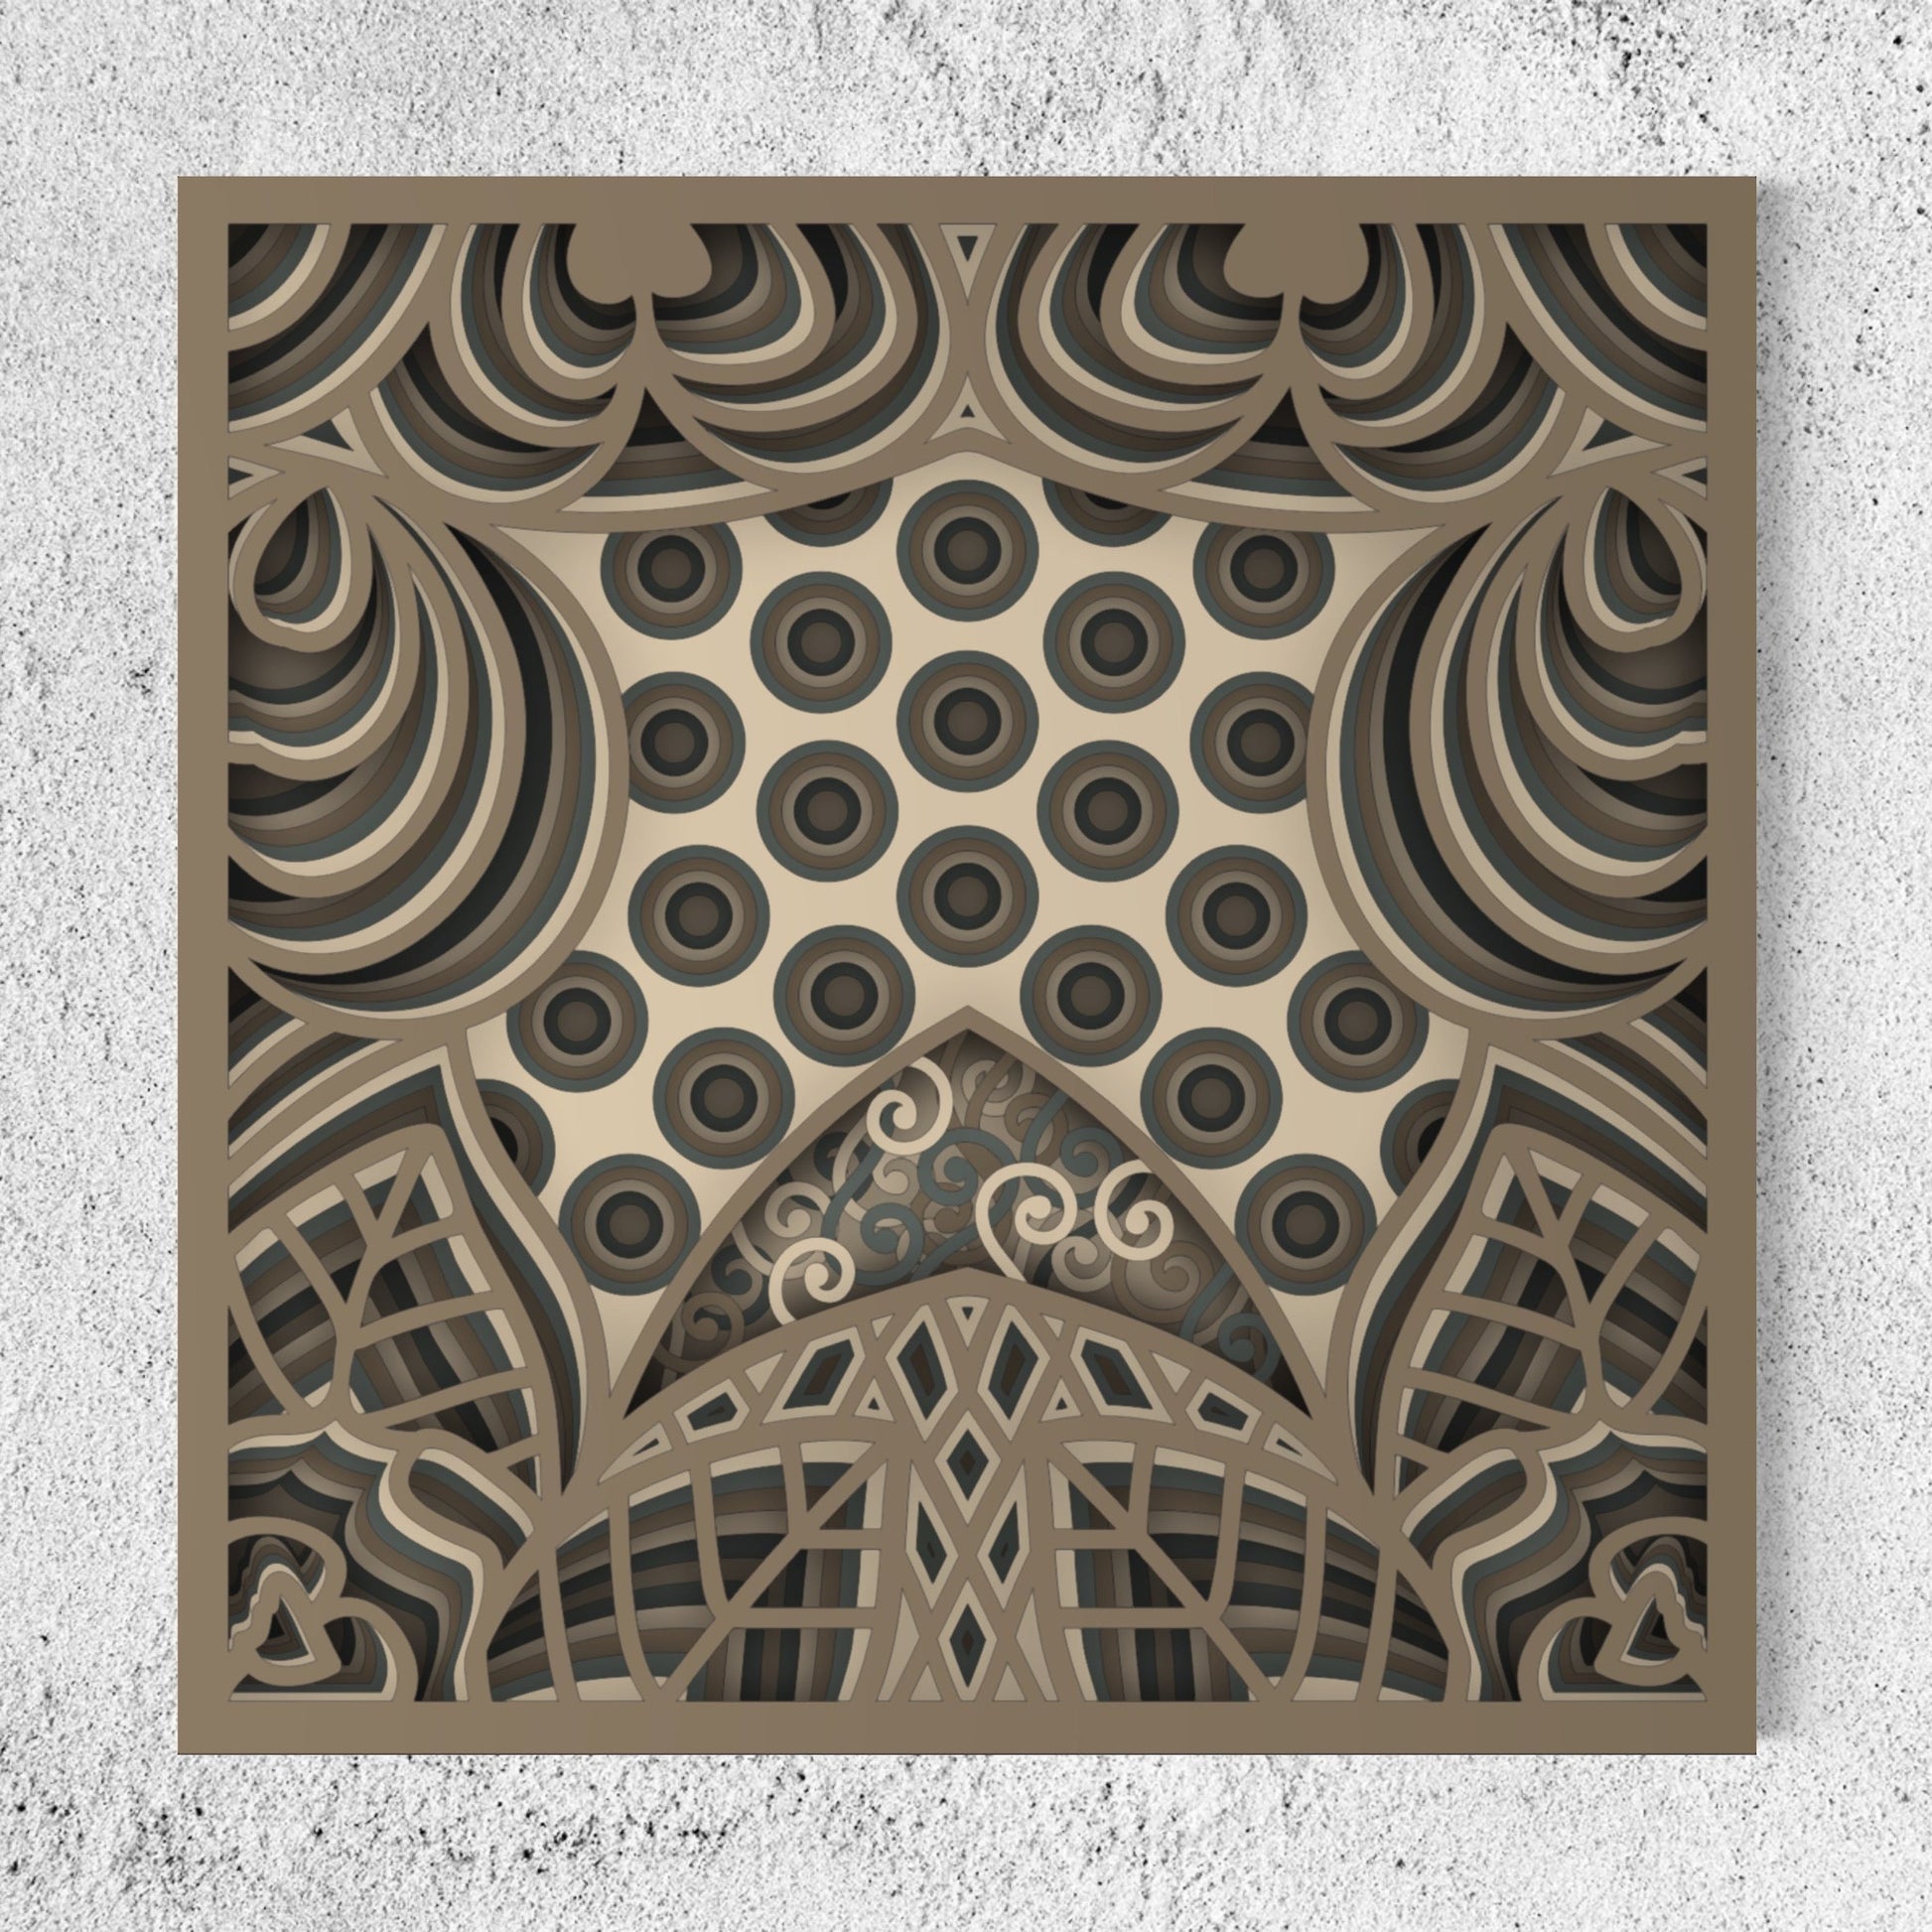 Ace of Spade Wooden Wall Art | 15 x 15 Inch | Color Pastel Brown, Vanilla and Black Eel